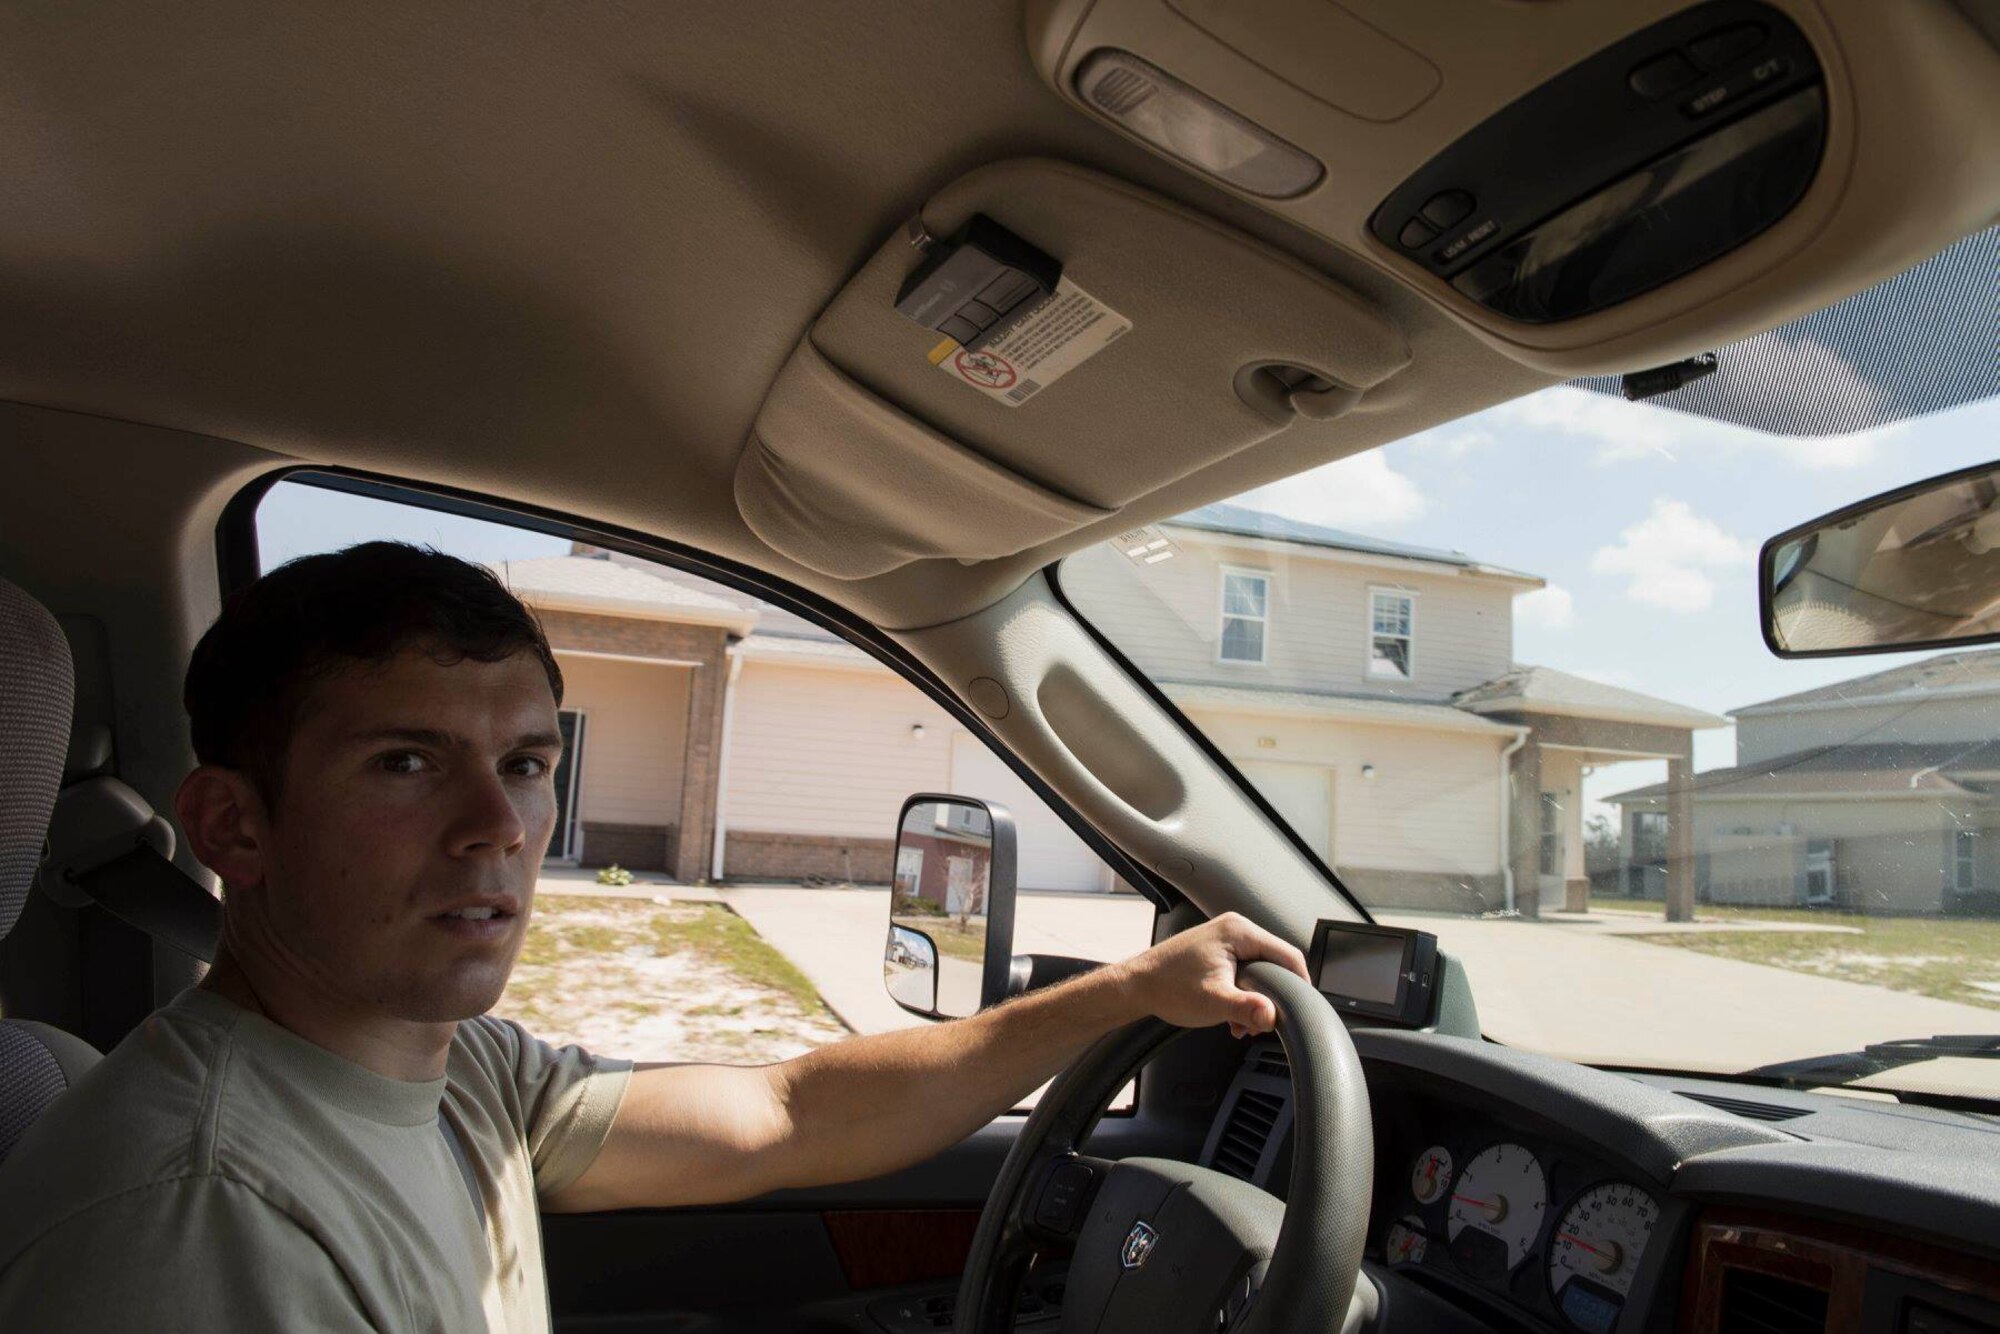 1st Lt. Adam Kriete, 337th Air Control Squadron student, drives through his neighborhood to inspect damage, at Tyndall Air Force Base, Fla., Oct. 19, 2018. Tyndall AFB was damaged by Hurricane Michael which displaced approximately 11,000 people, to include the Kriete family who travelled back to Tyndall during a five hour window to recover their belongings.